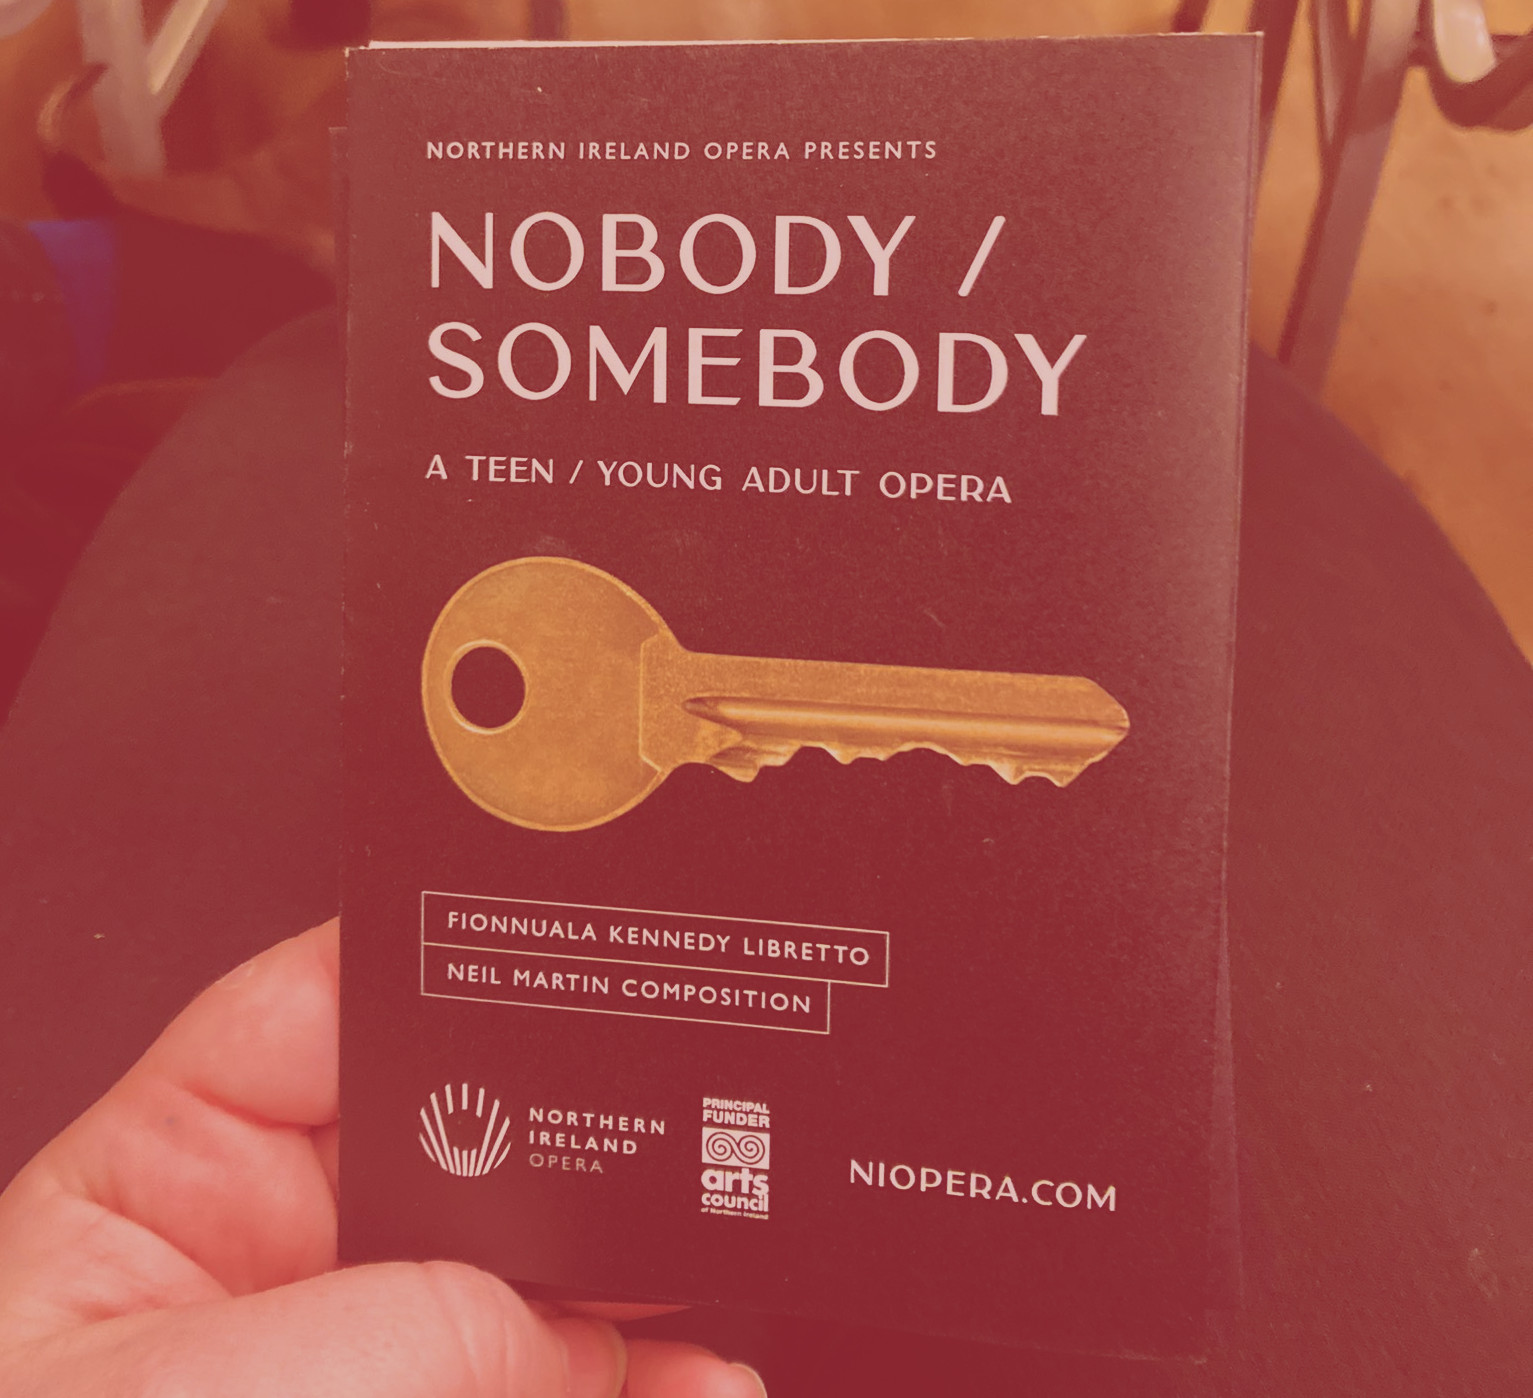 An audience member takes a photograph of his hand holding a programme for the Nobody /Somebody performace. On the cover is a golden key against a block backdrop 